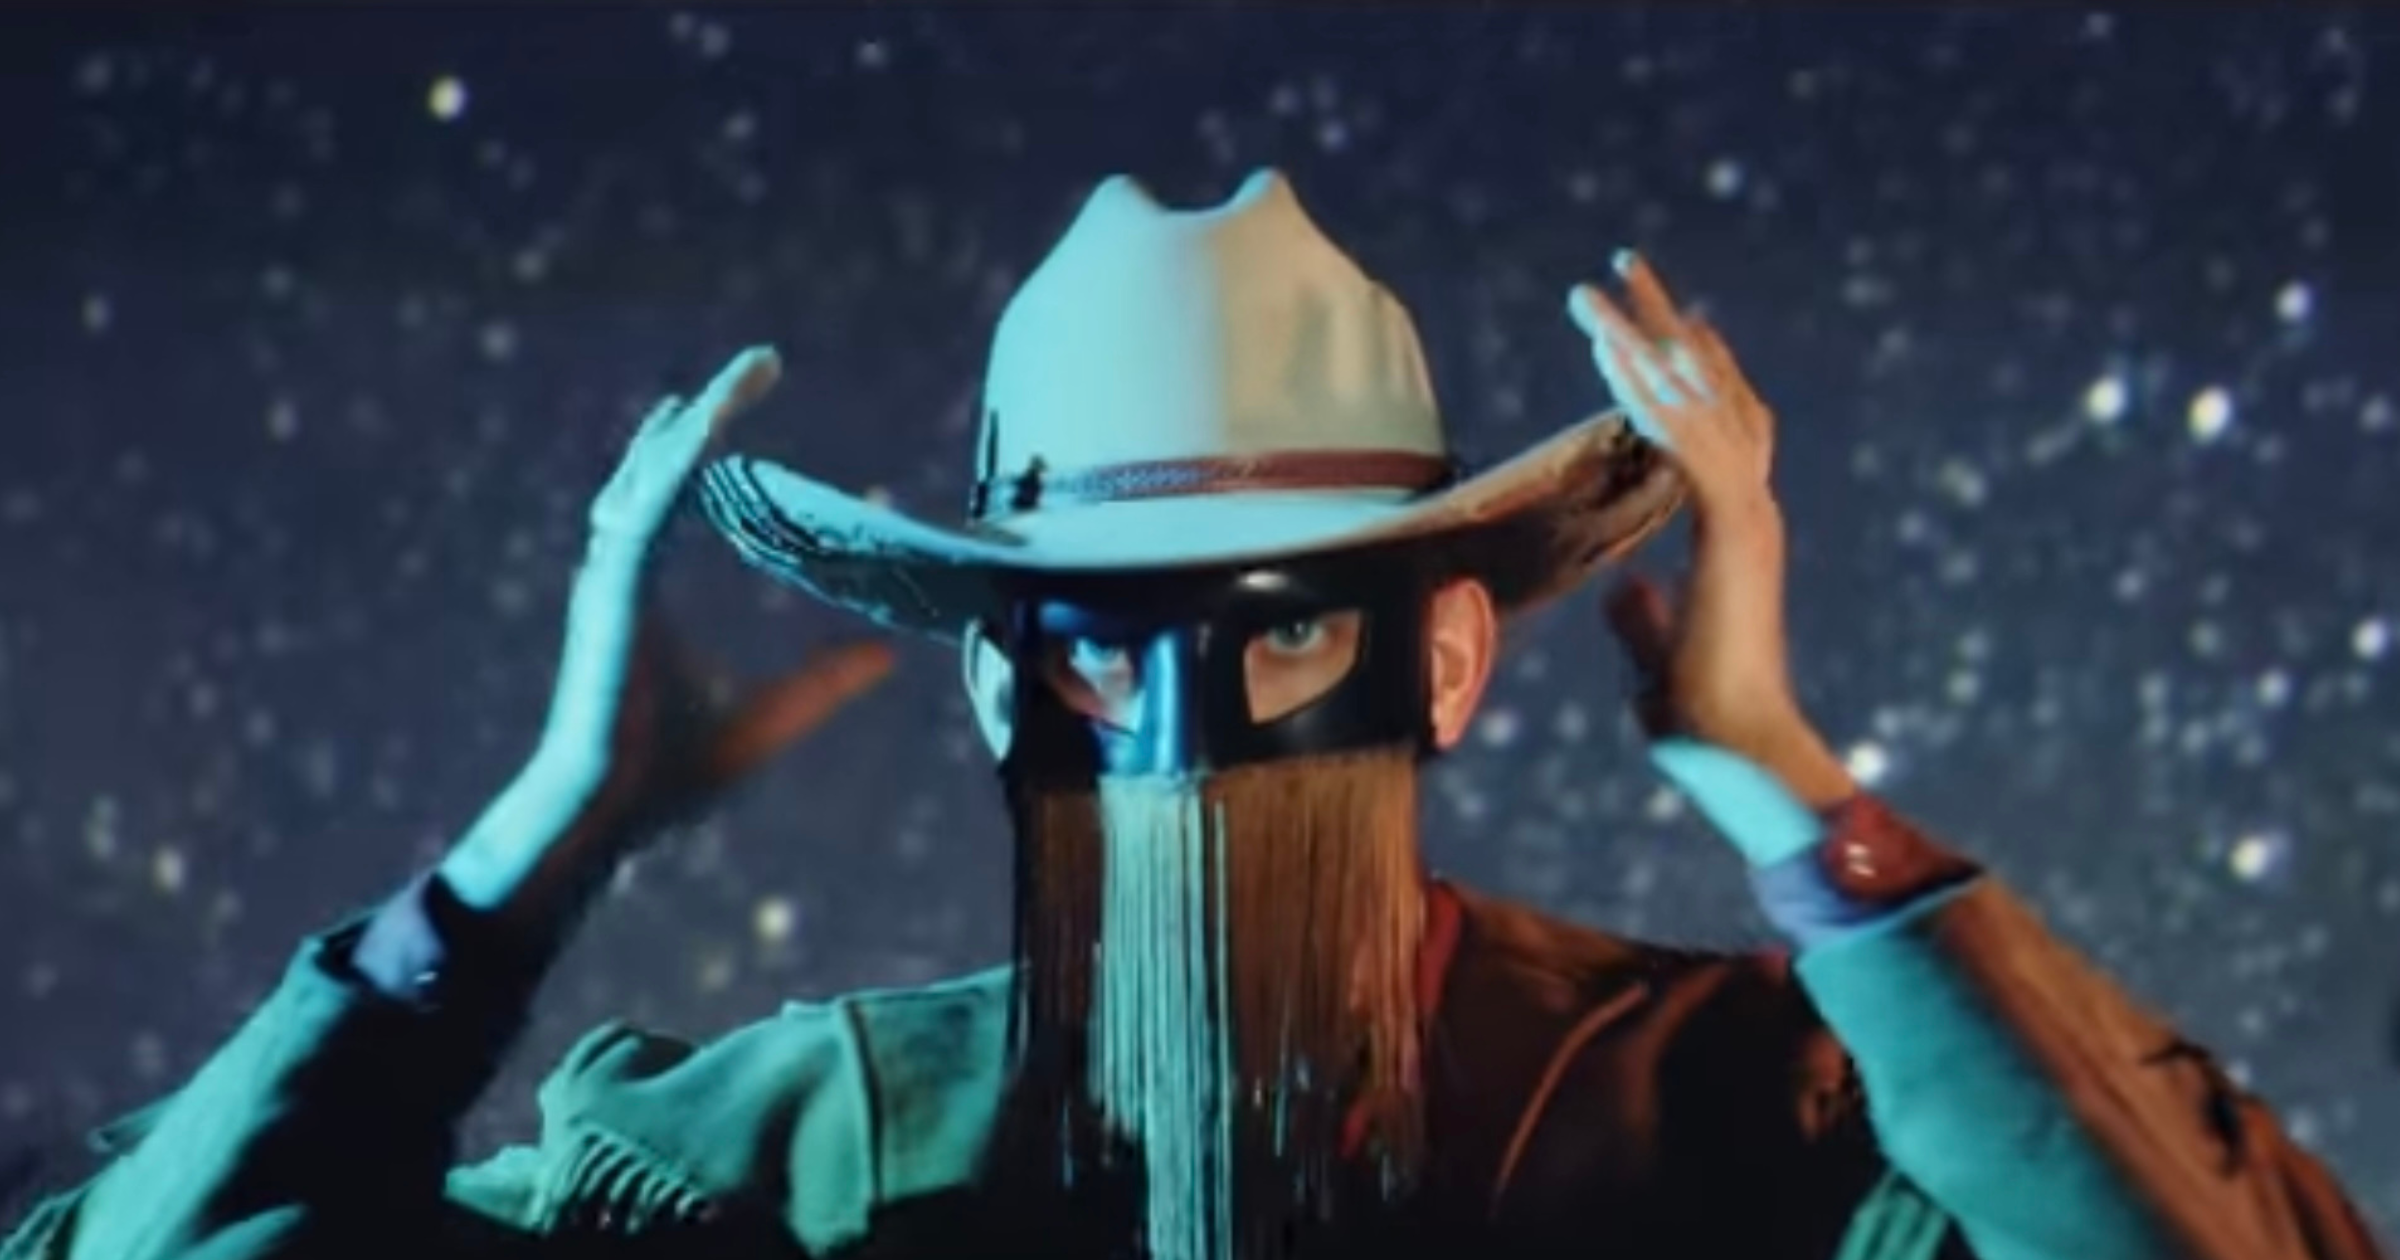 5 Videos to Welcome You to the World of Orville Peck